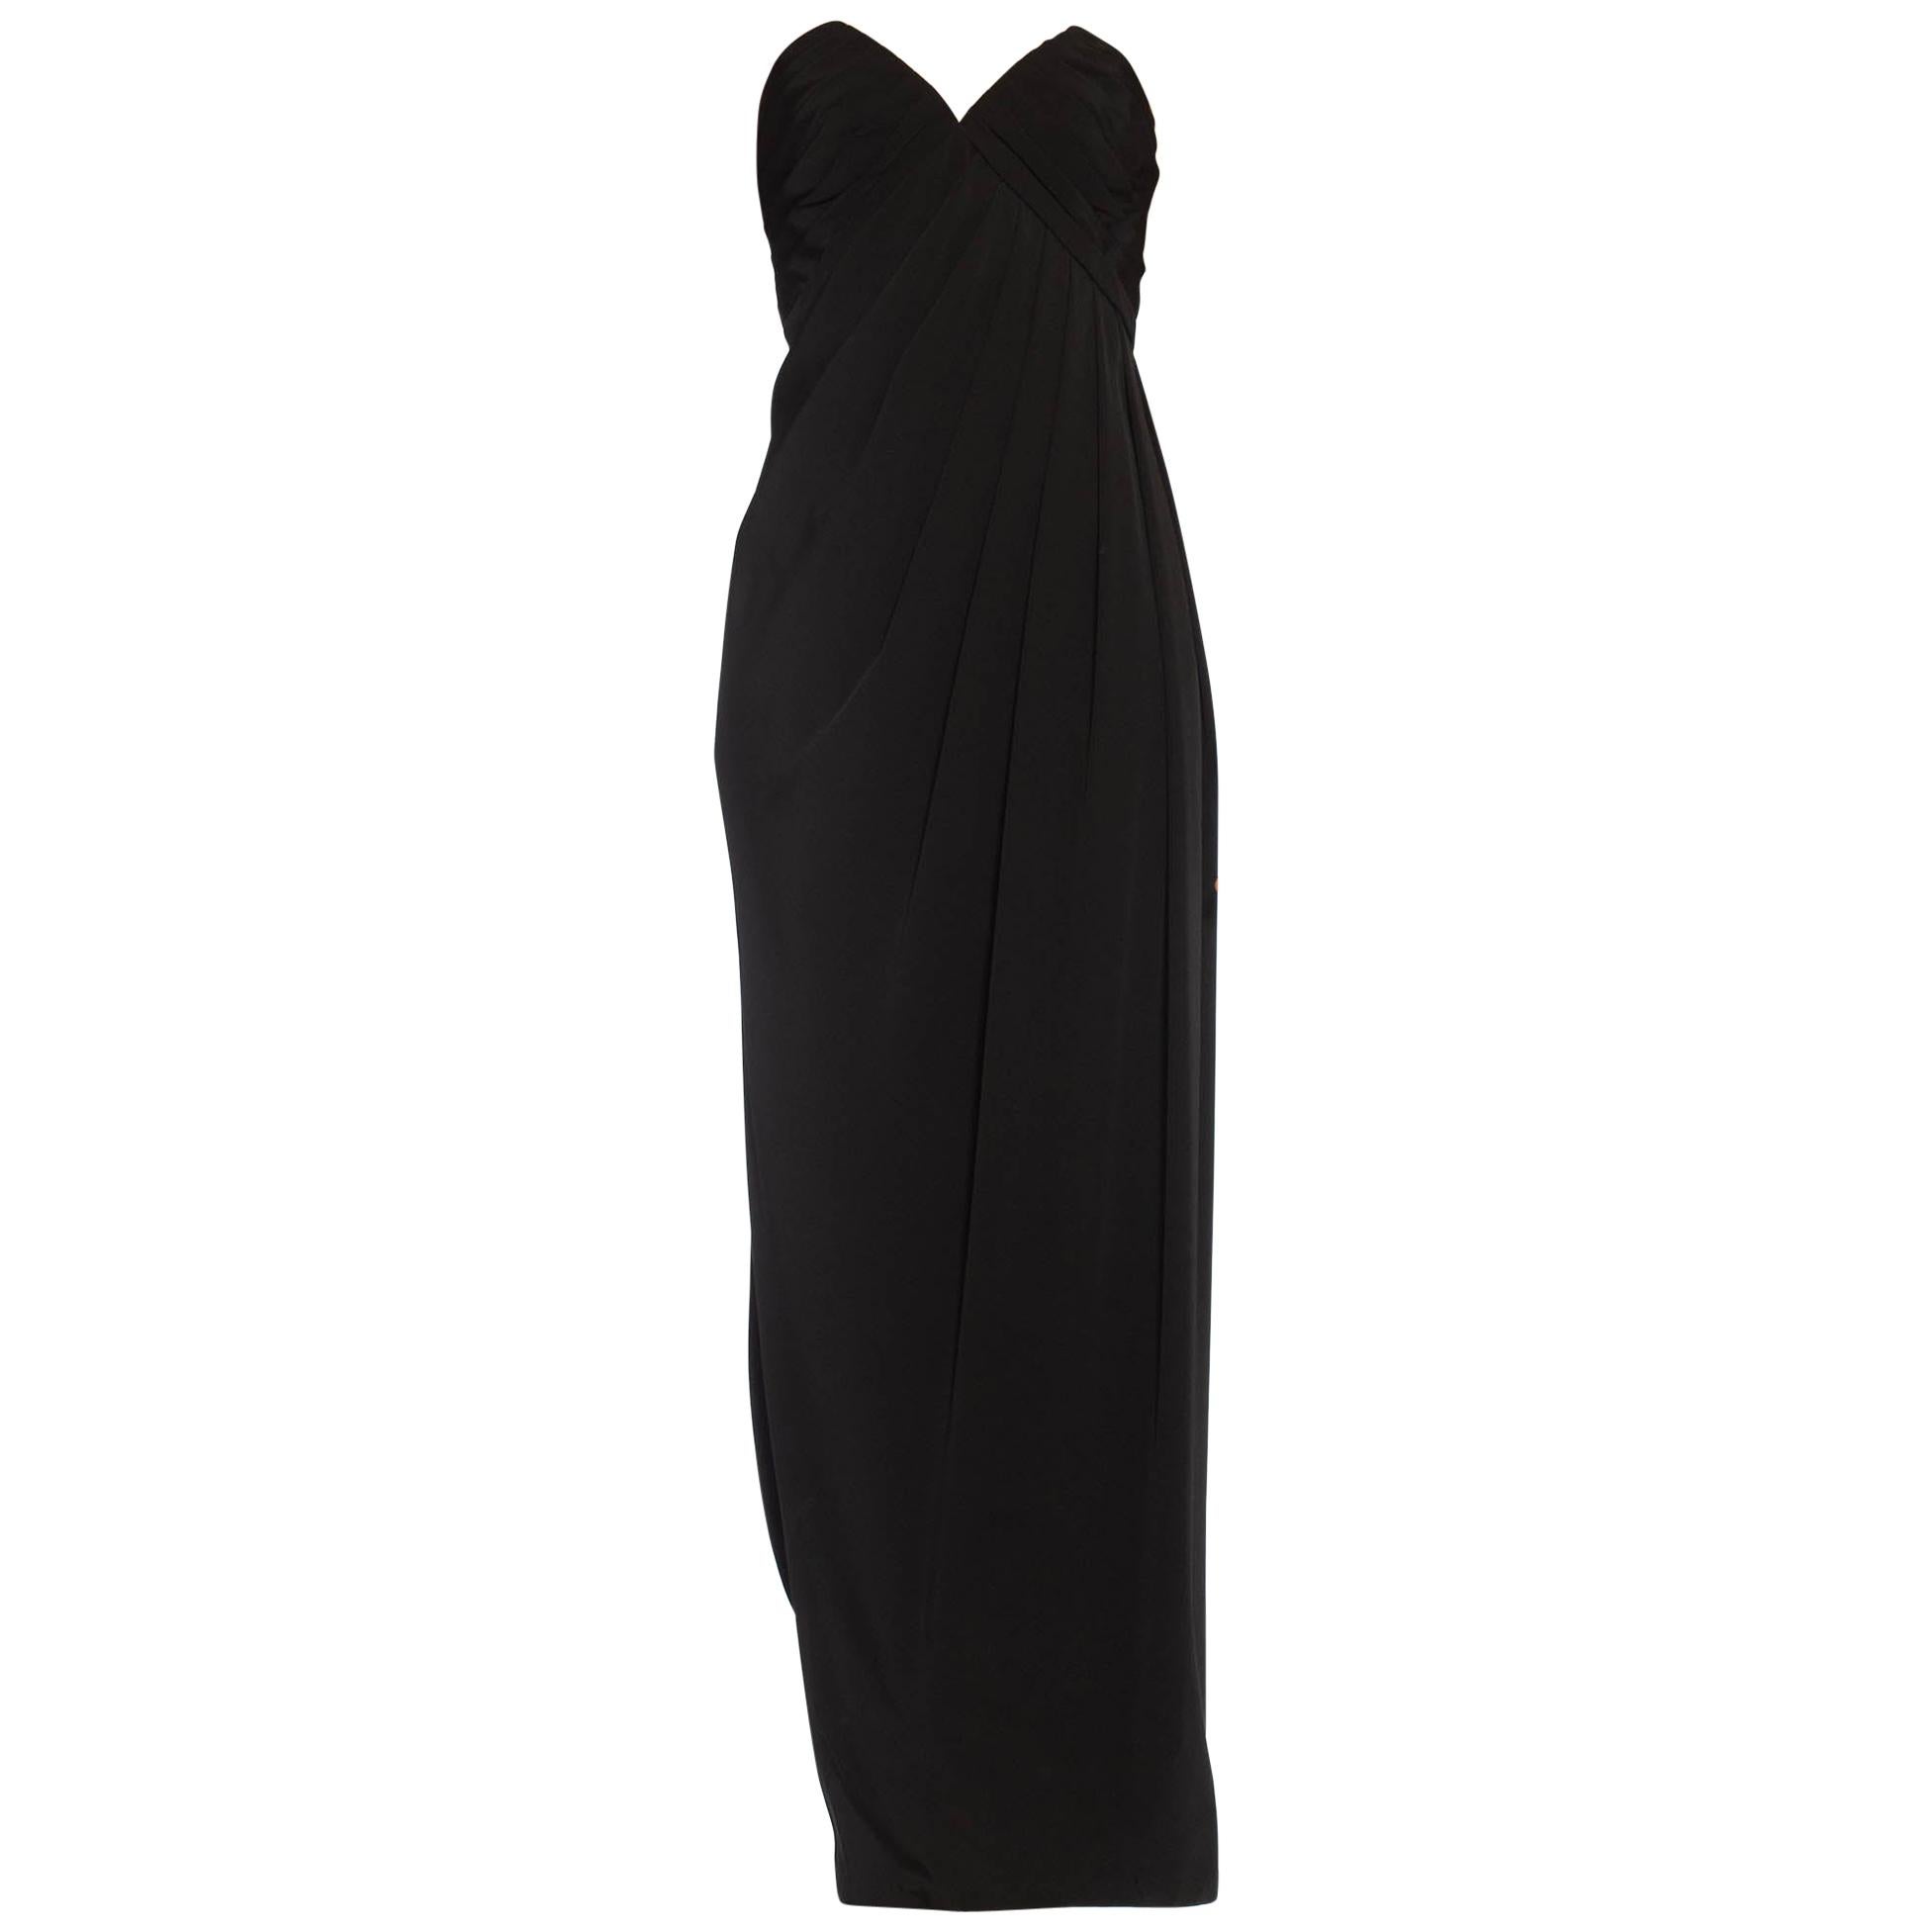 1980S GIVENCHY Black Haute Couture Silk Crepe Strapless Gown For Sale ...